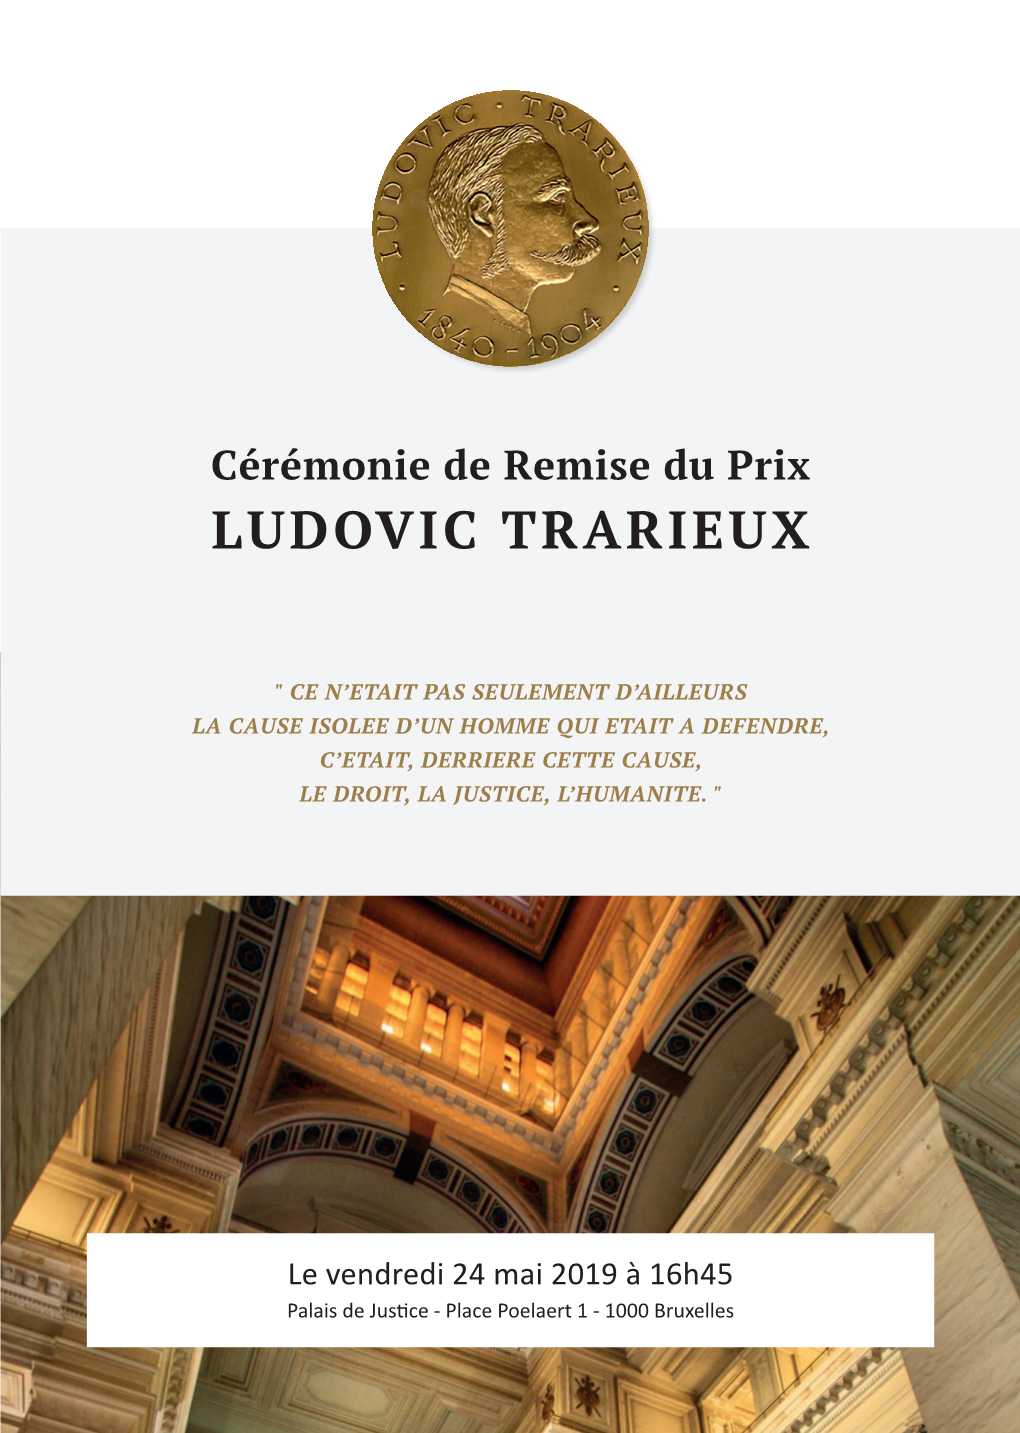 Ludovic Trarieux